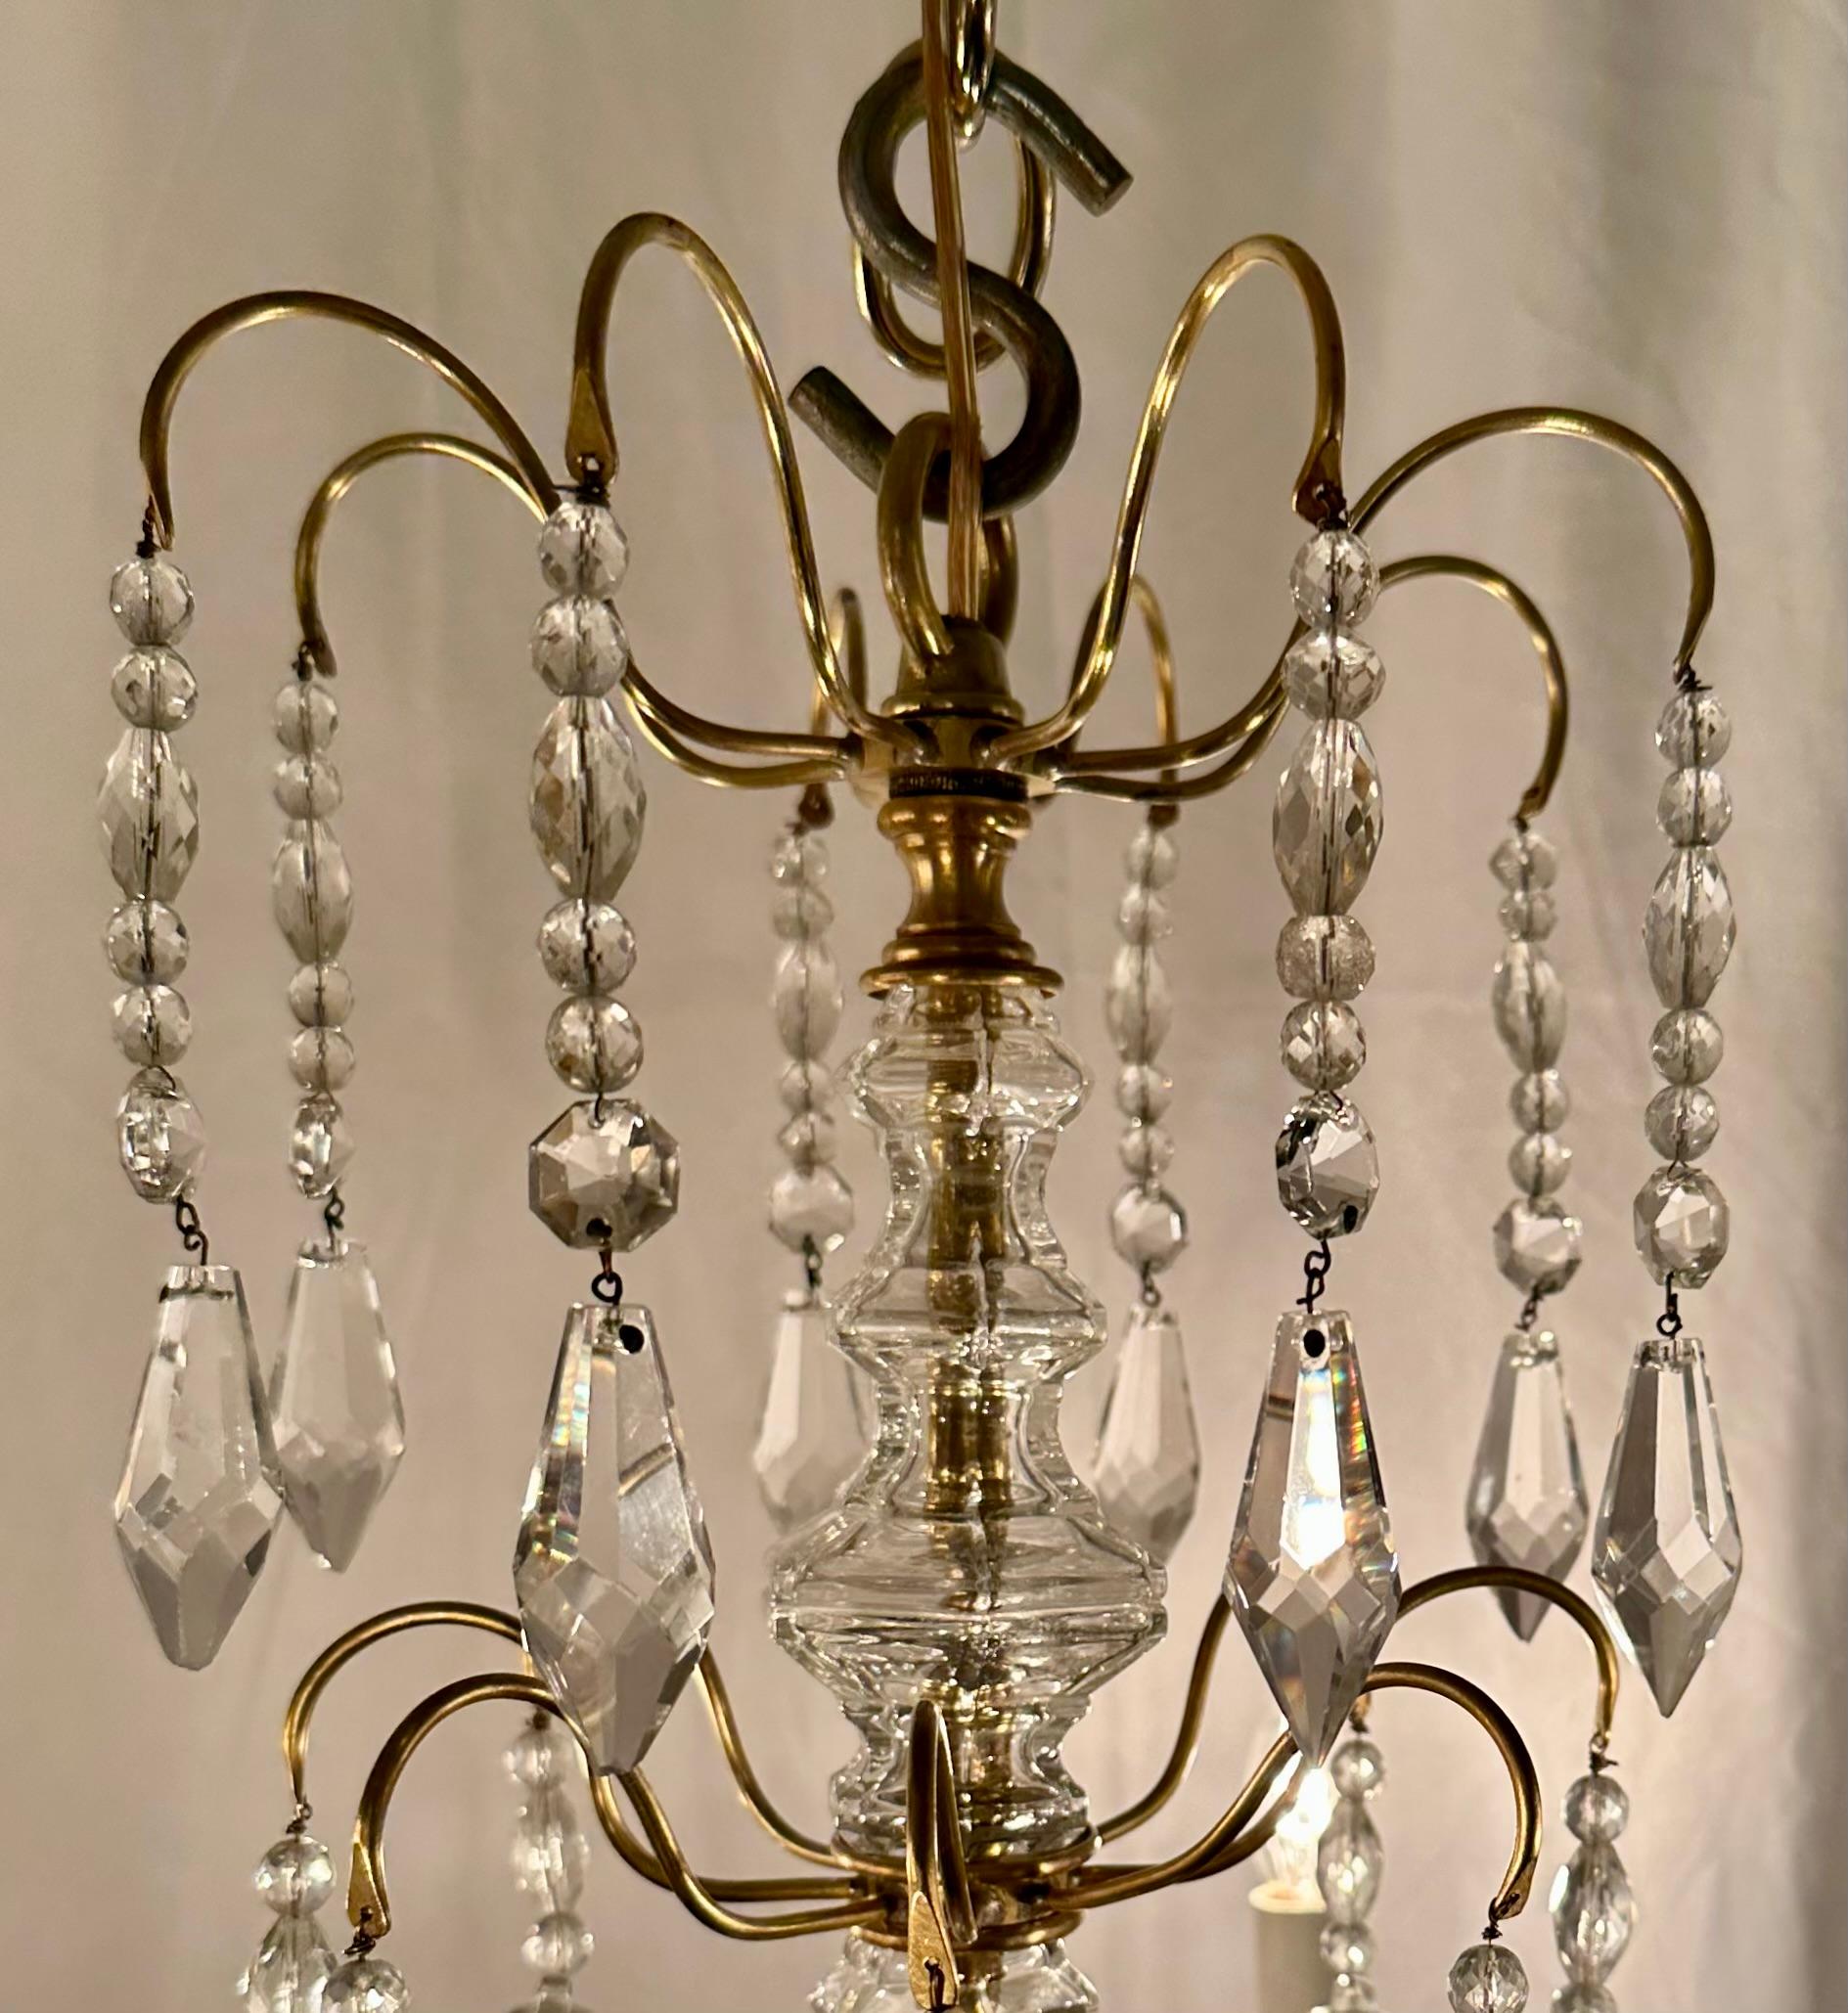 20th Century Antique French Crystal and Gold Bronze Chandelier, Circa 1910-1920. For Sale